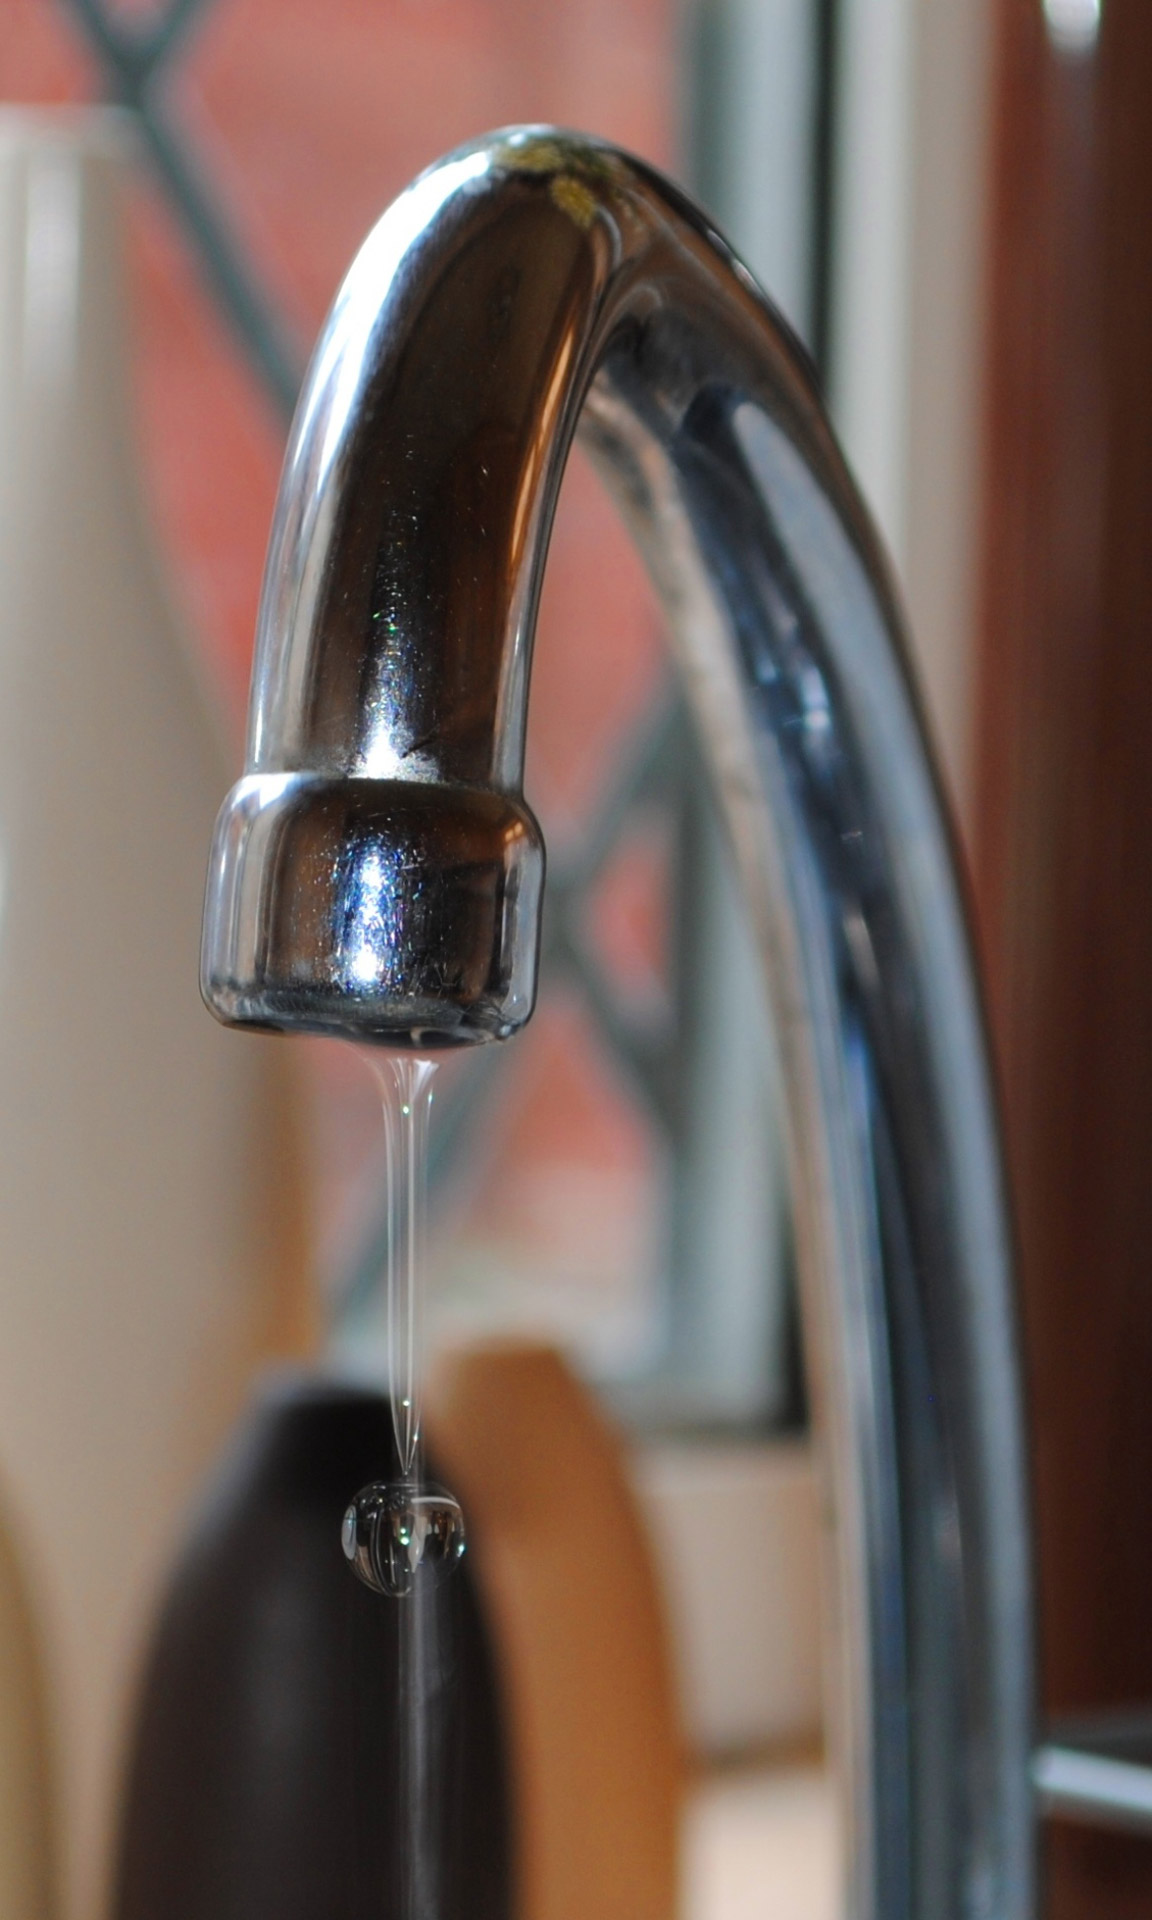 Dripping Faucet Gif